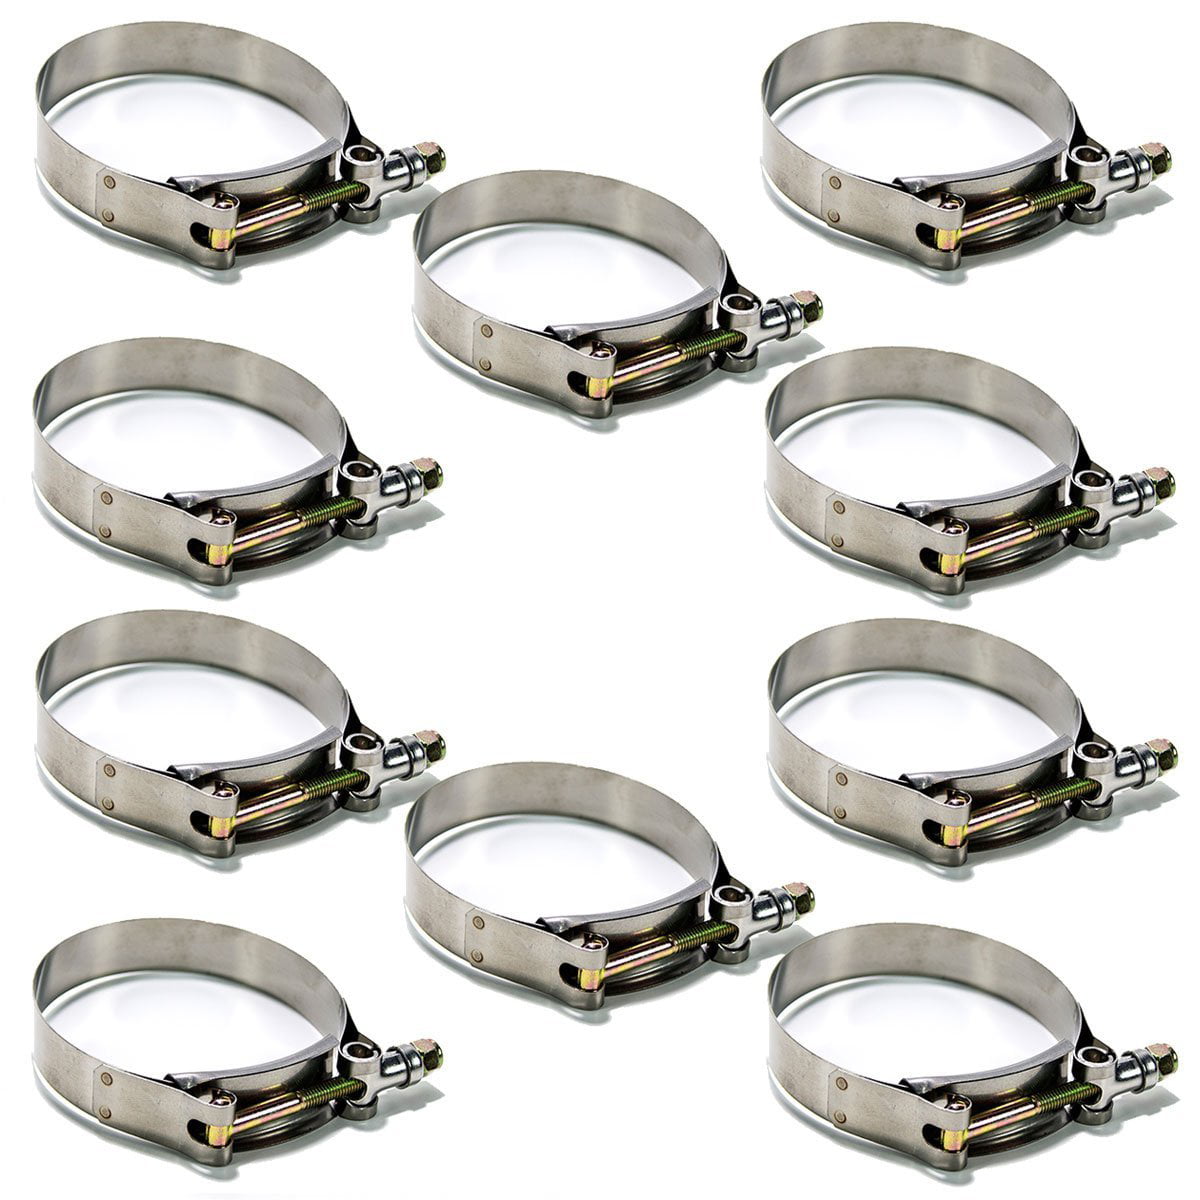 Glarks 5Pcs 63-71mm Stainless Steel T-Bolt Hose Clamps Turbo Intake Soft Hose Intercooler Clamps 